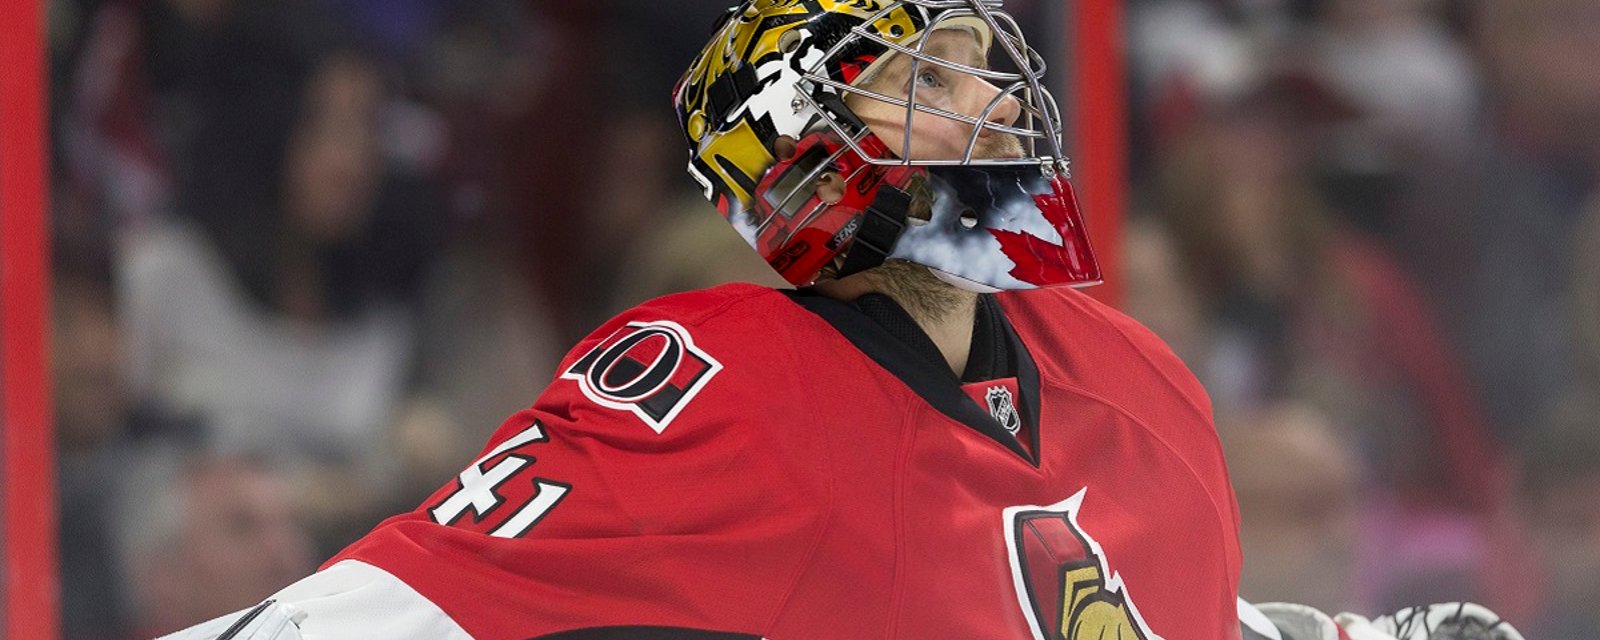 Good news from Craig Anderson's wife as she battles cancer.